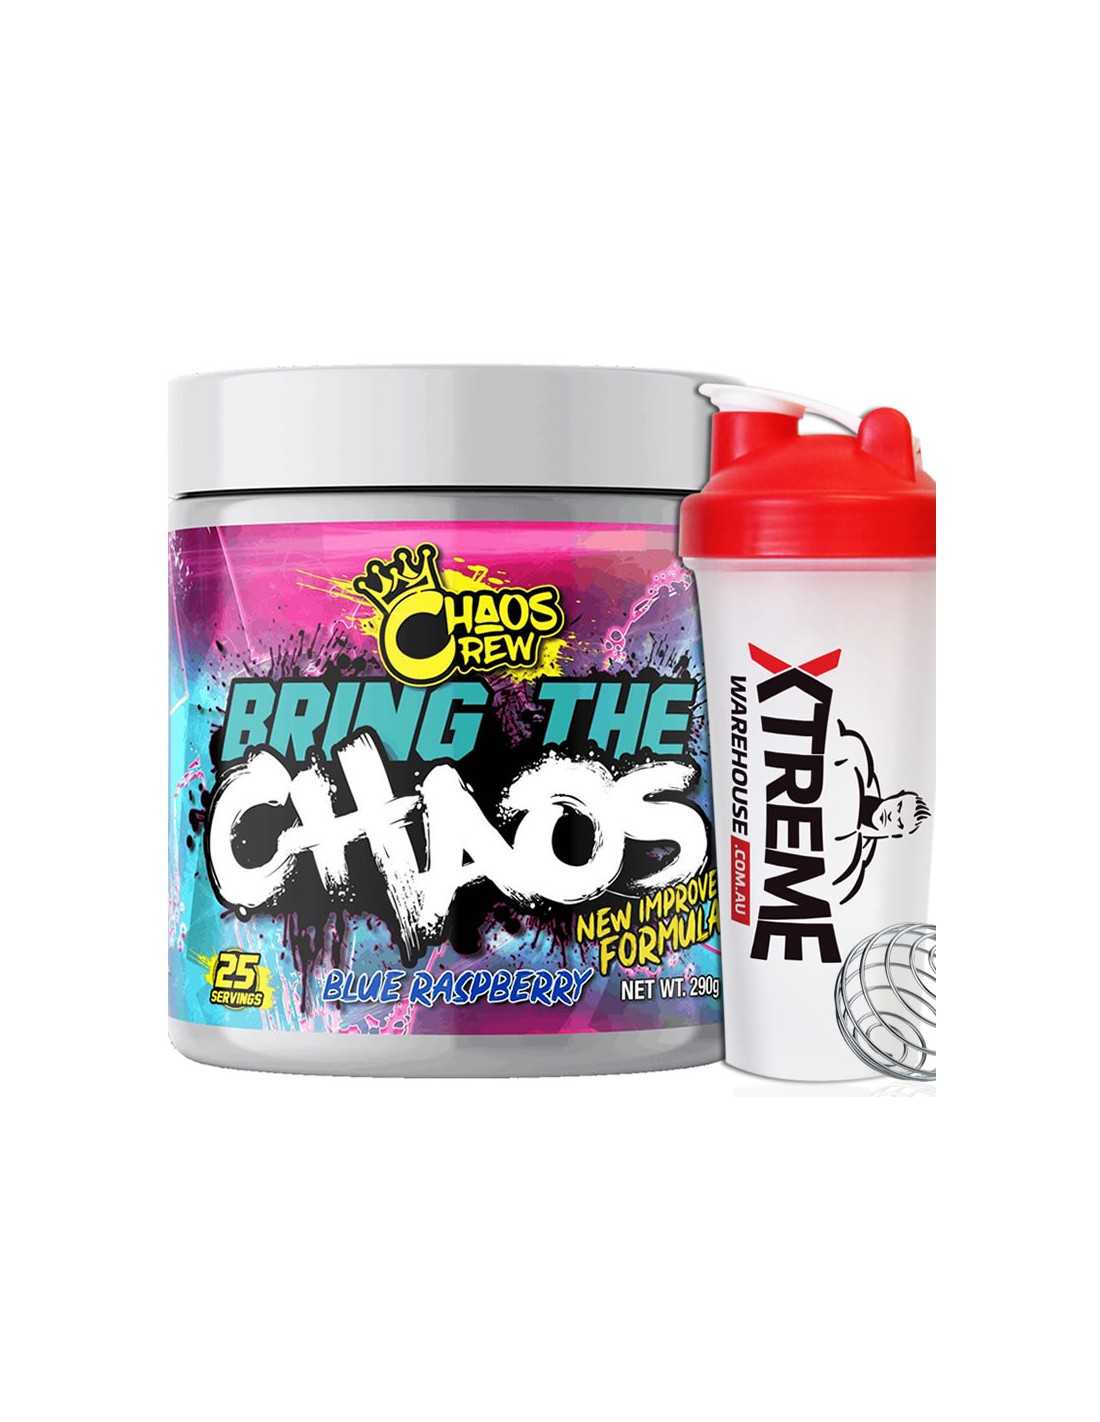 https://xtremewarehouse.com.au/2894-thickbox_default/bring-the-chaos-pre-workout-by-chaos-crew-australia.jpg